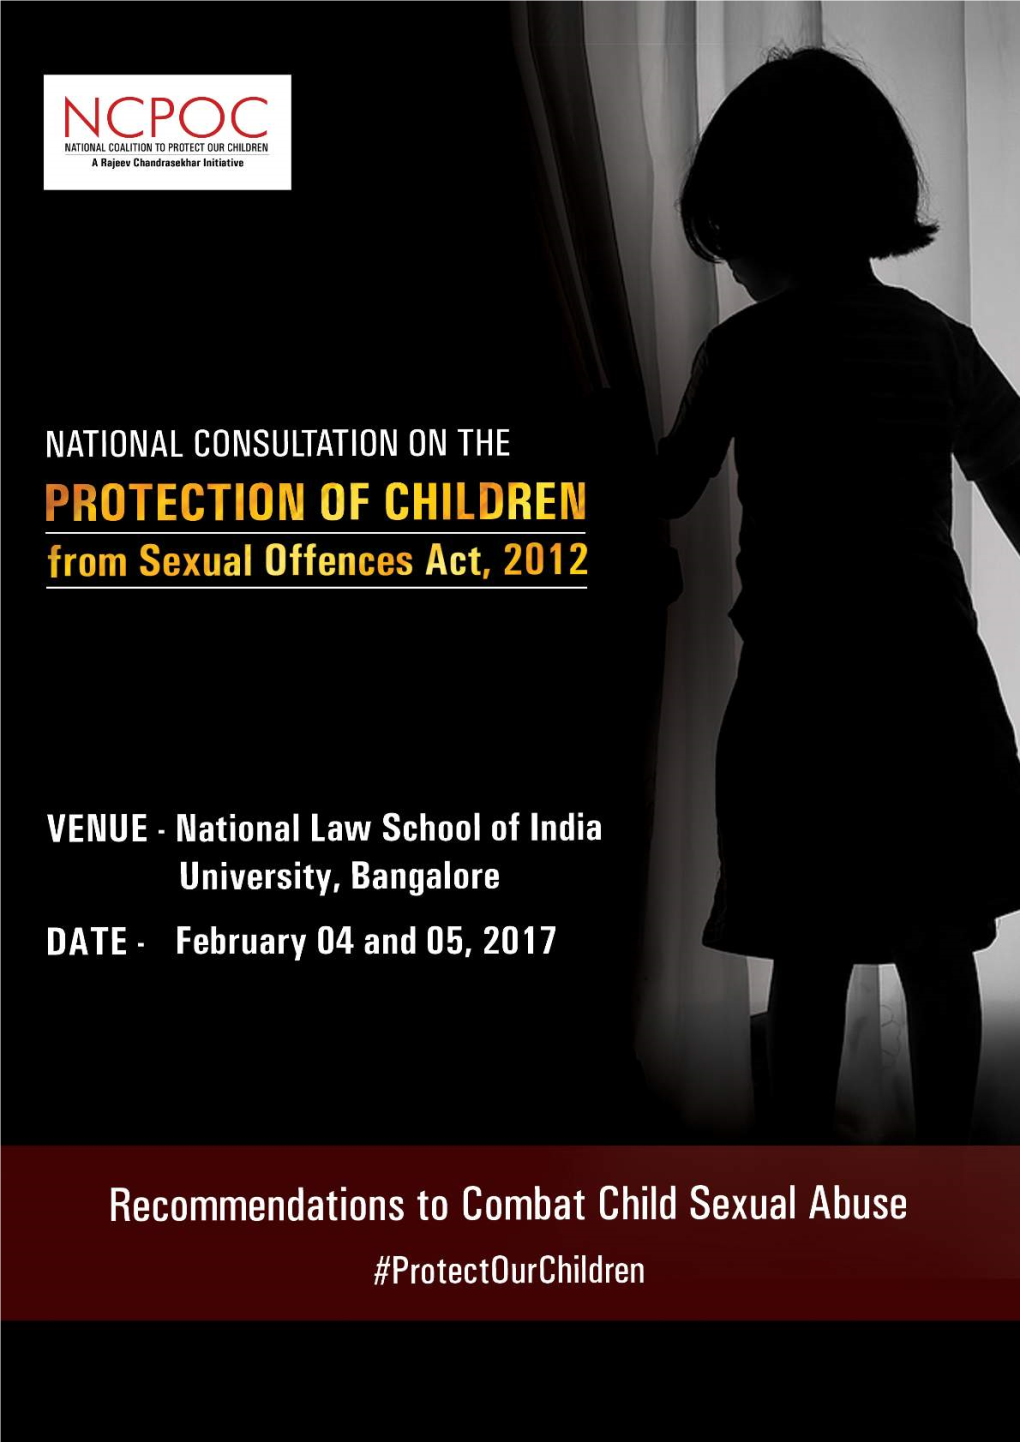 3. Health and Child Sexual Abuse